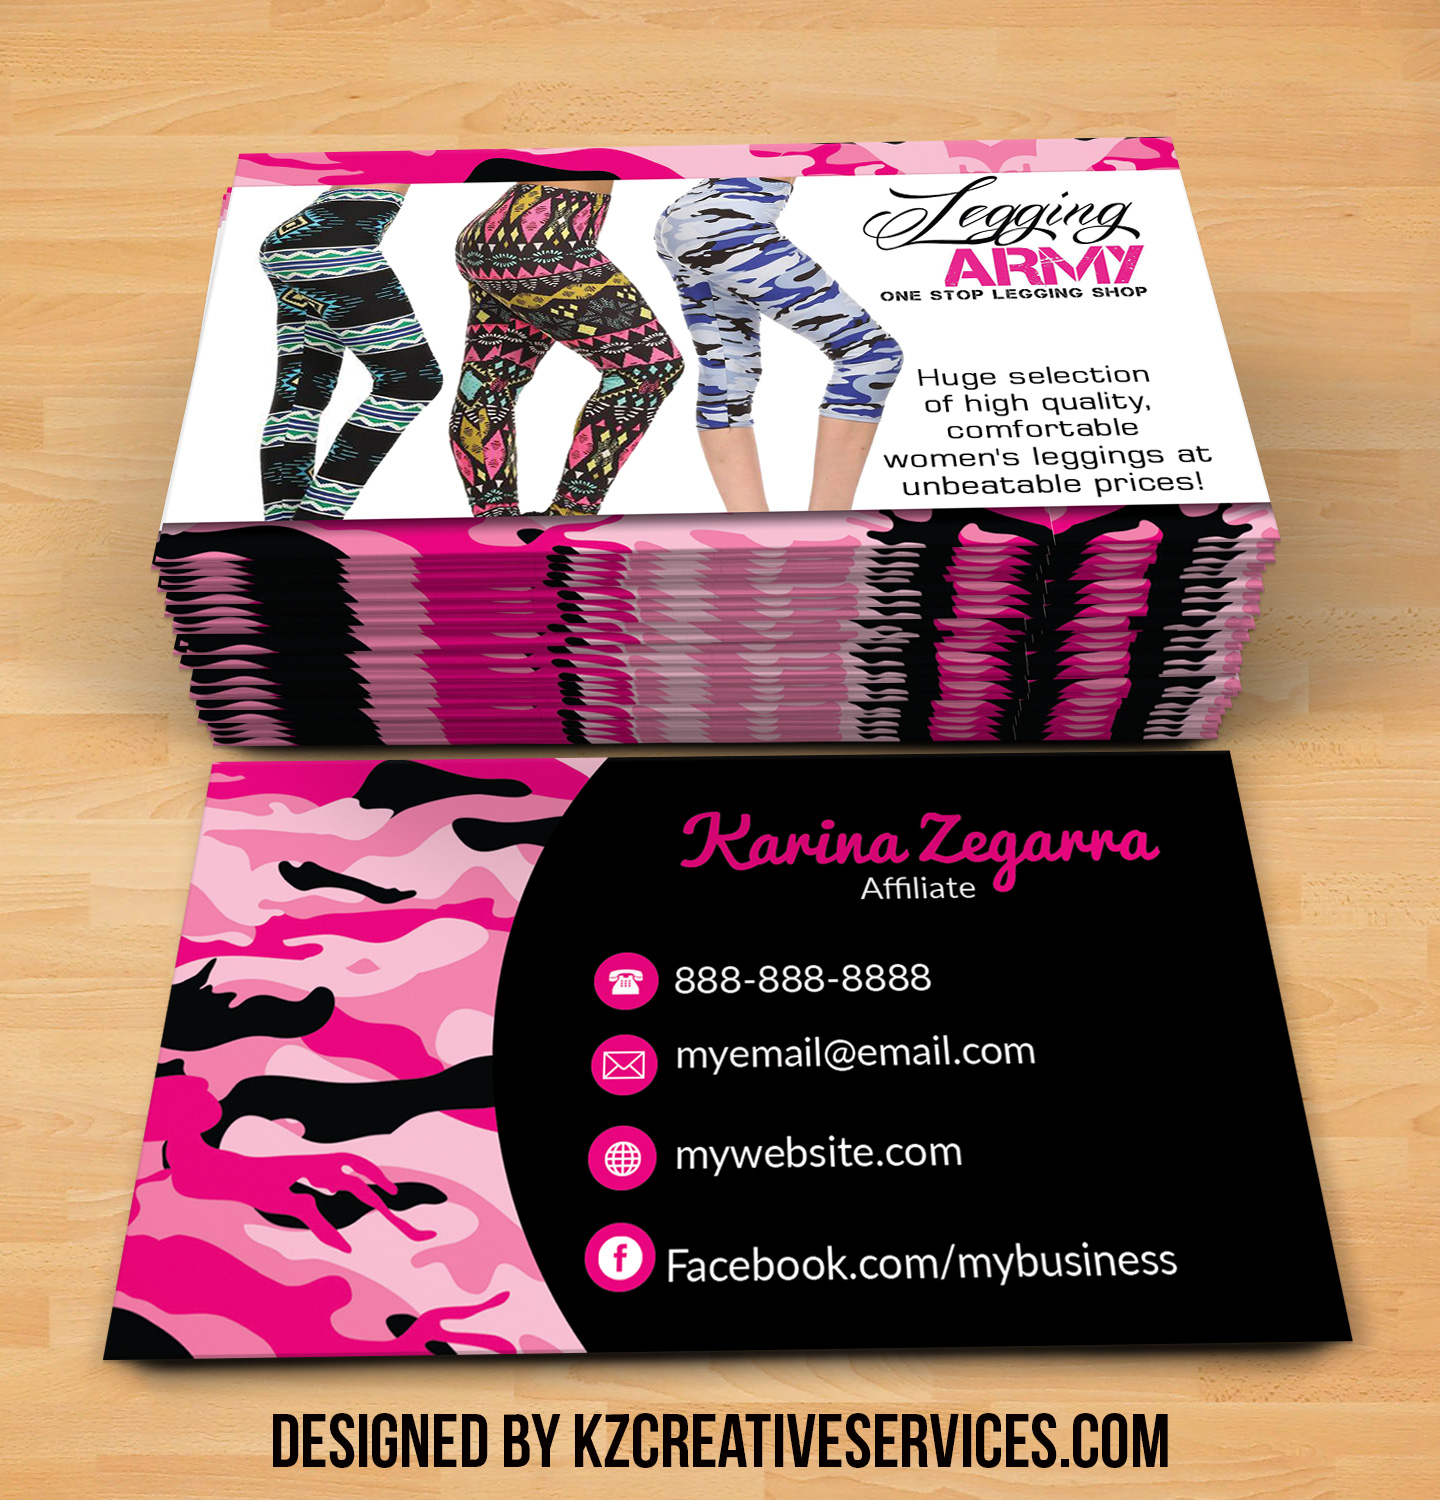 legging army business cards 1